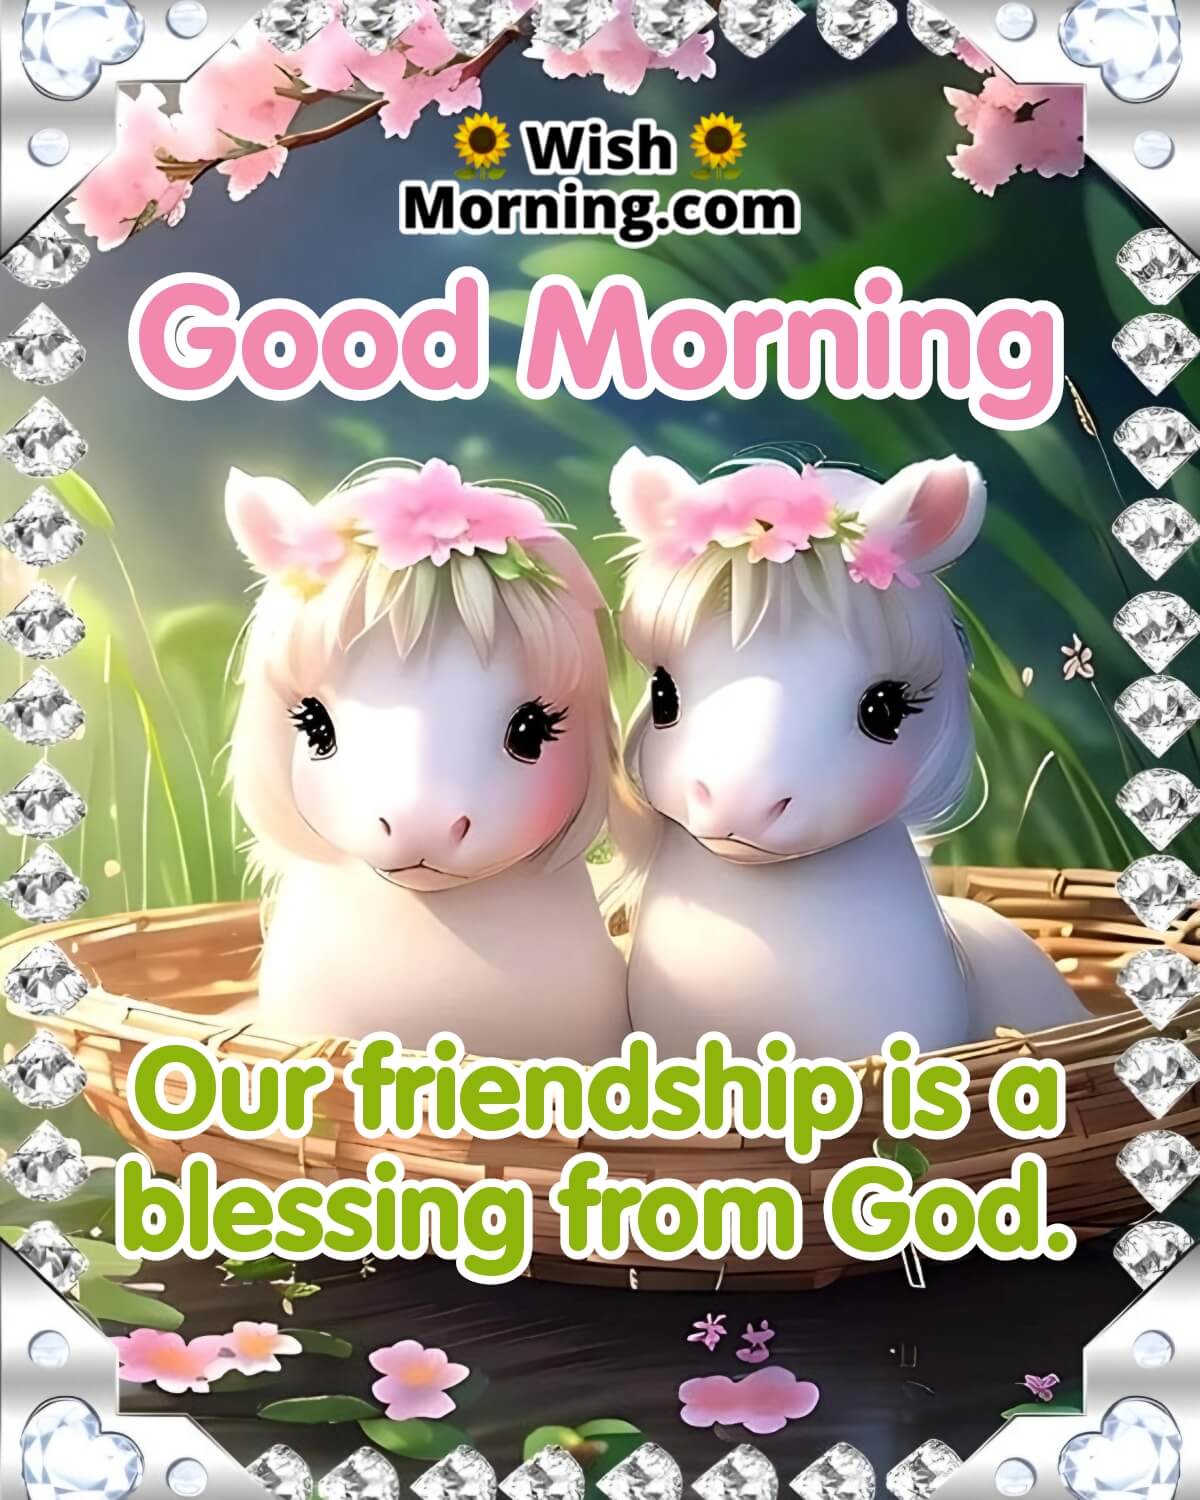 Good Morning Blessings Quotes for Friends - Wish Morning